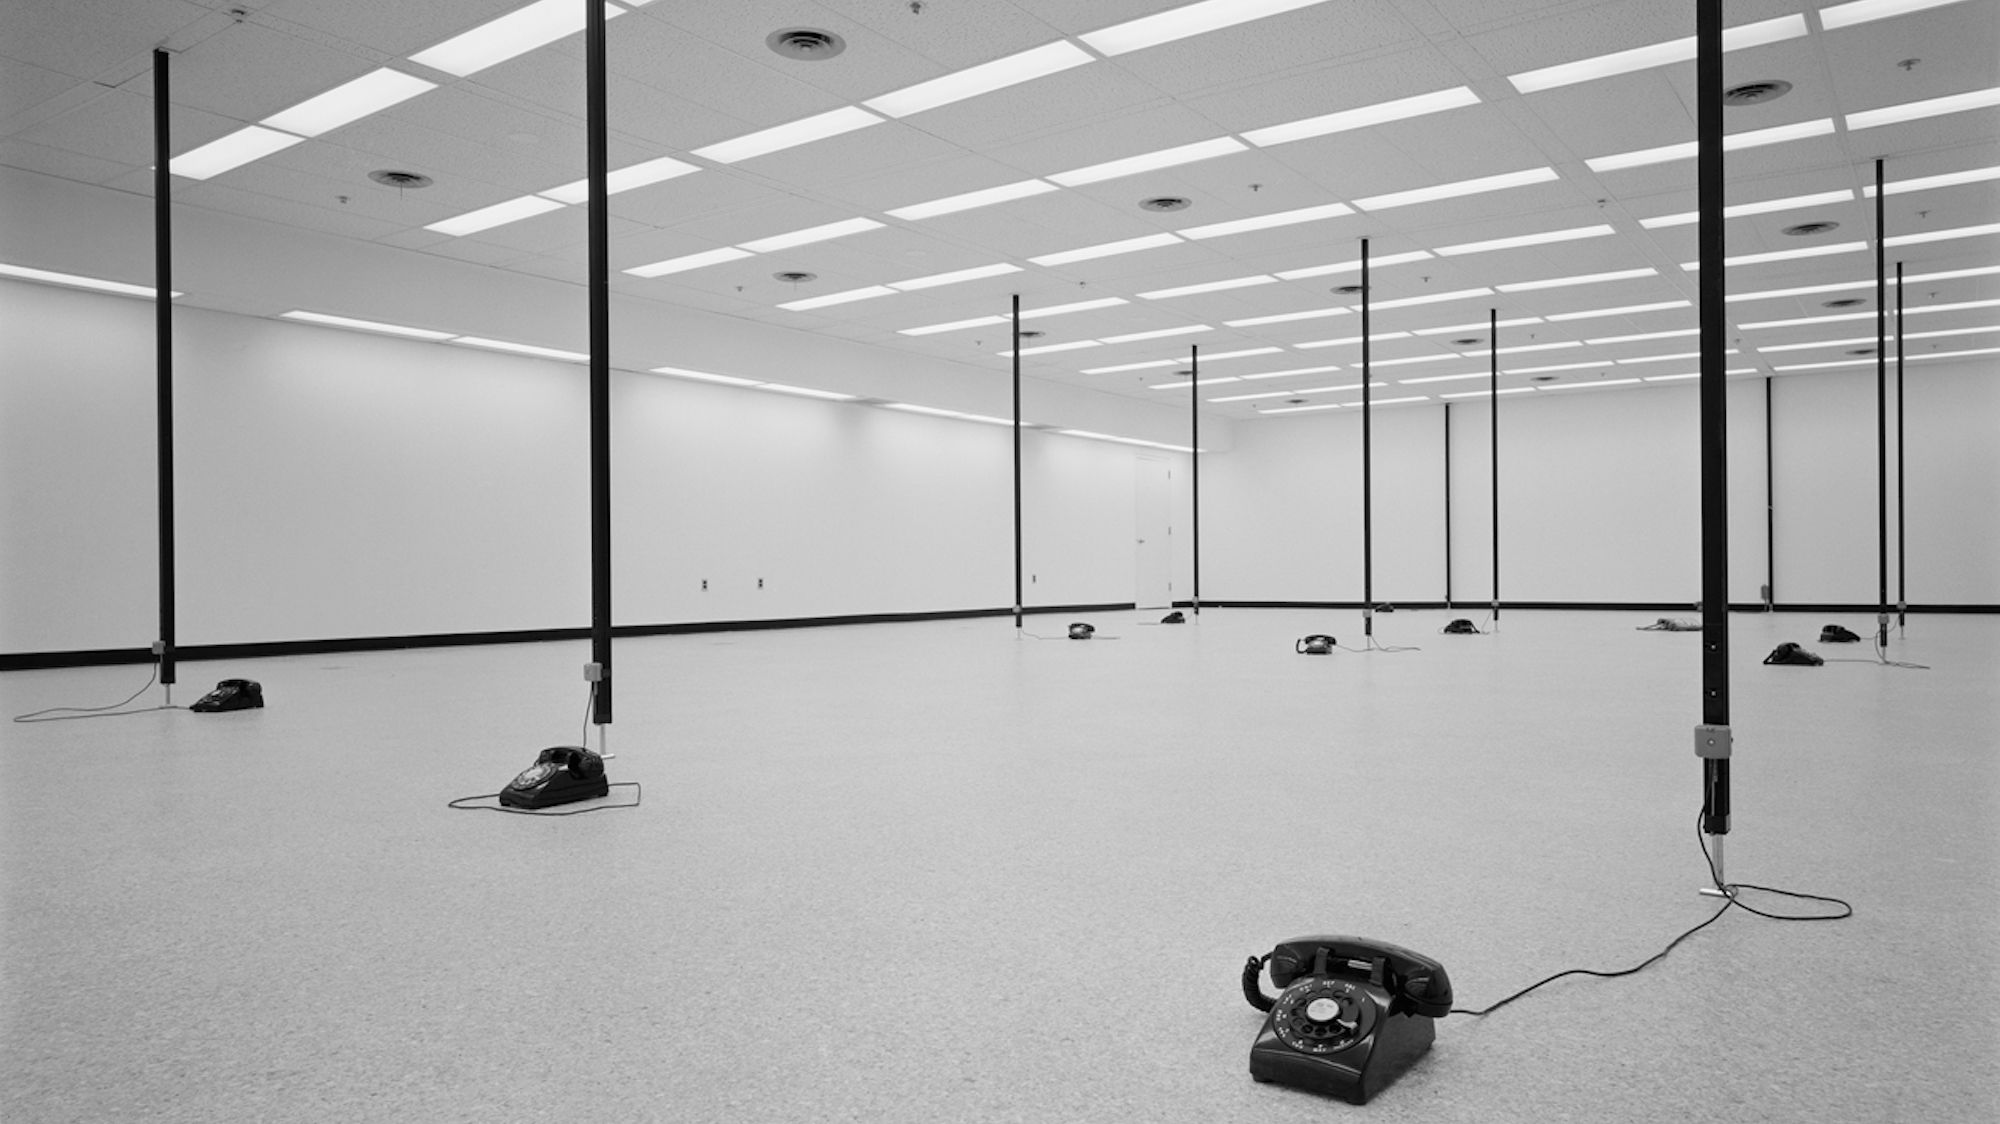 A photograph of a large white, windowless space, empty except for numerous black, old-fashioned telephones spaced out across the floor, attached to black poles up to the ceiling.